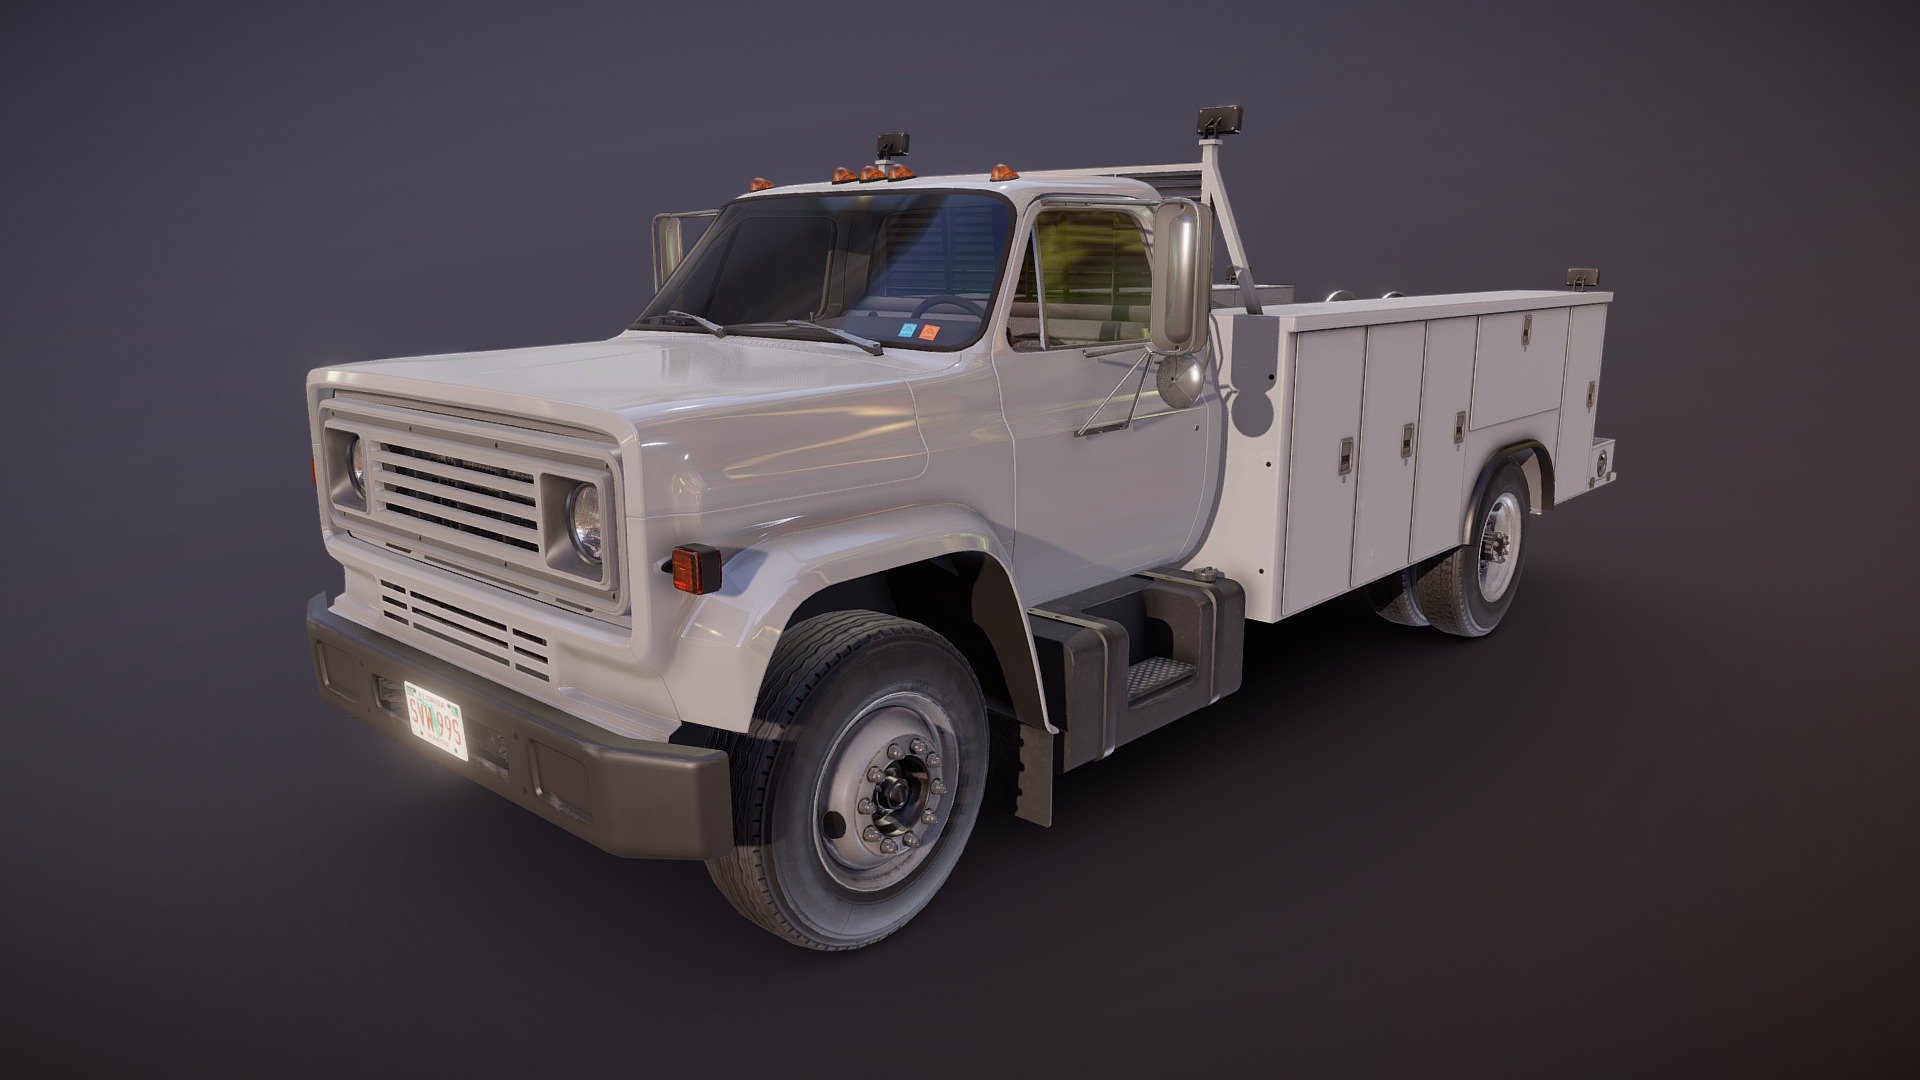 Vintage service truck game ready model.

Full textured model with clean topology.

High accuracy exterior model.

Different tires for rear and front wheels.

Lowpoly interior - 2855 tris 1662 verts

Wheels - 10254 tris 6132 verts

Full model - 56801 tris 33662 verts.

High detailed rims and tires, with PBR maps(Base_Color/Metallic/Normal/Roughness.png2048x2048 )

Model ready for real-time apps, games, virtual reality and augmented reality.

Asset looks accuracy and realistic and become a good part of your project 3d model